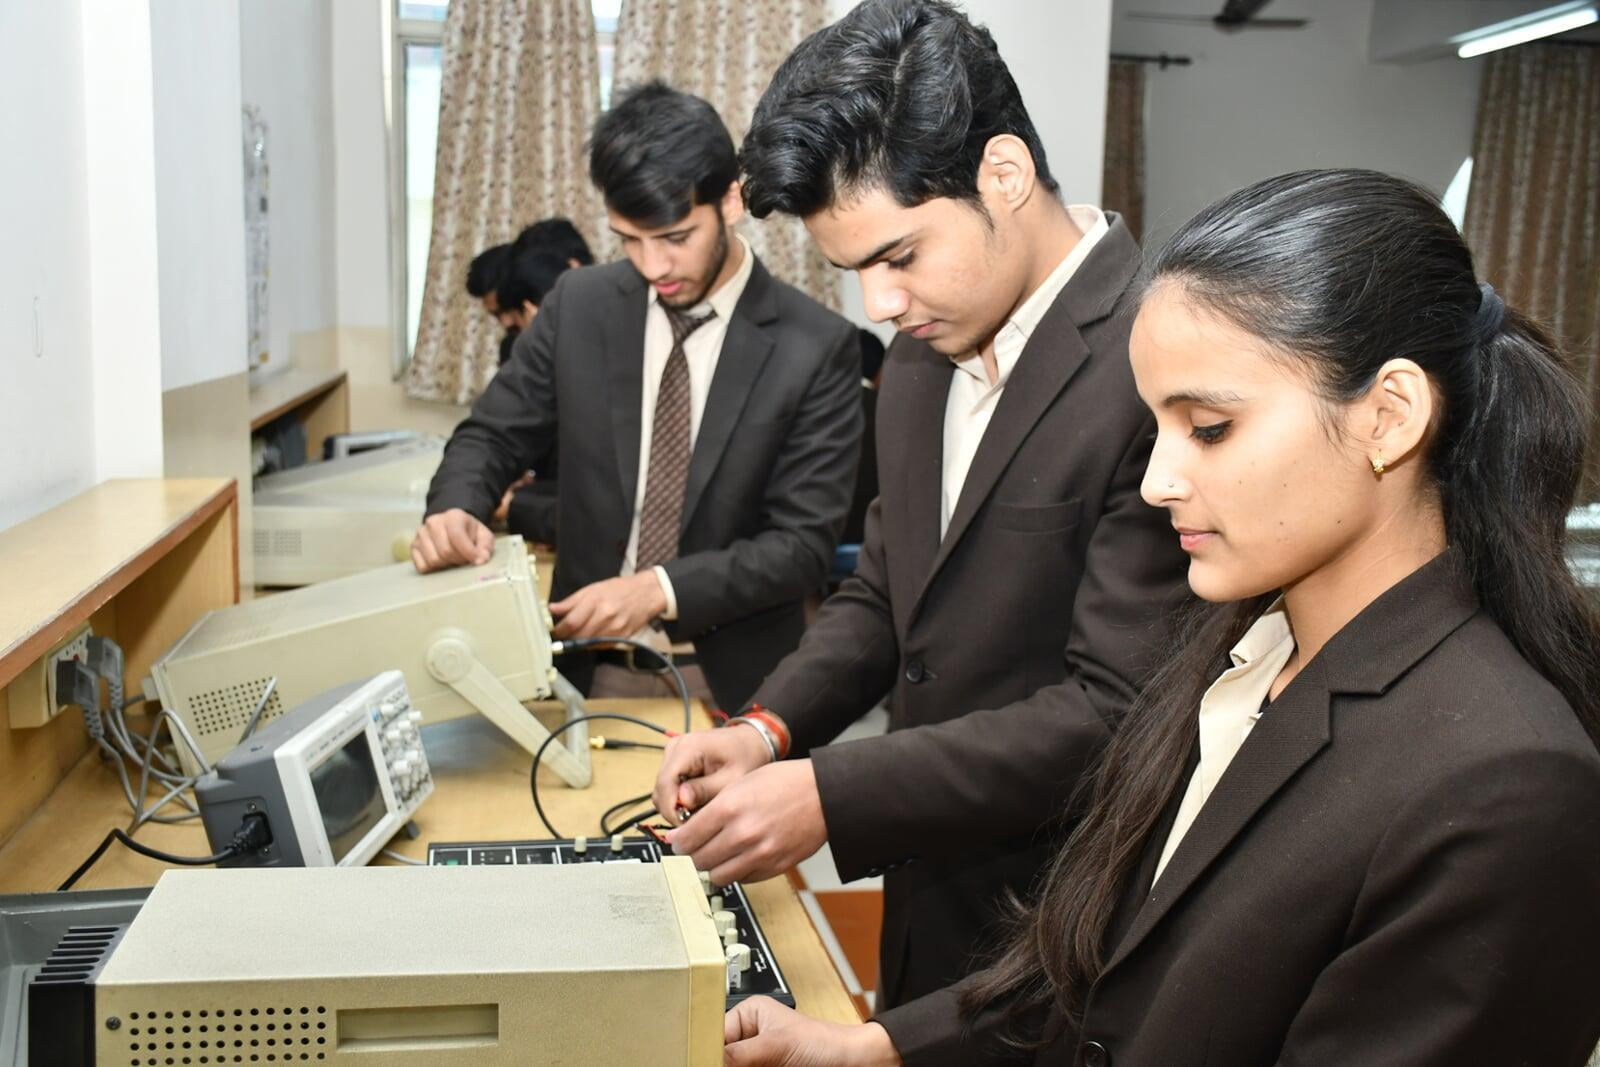 Integrated Circuit Lab at ITS